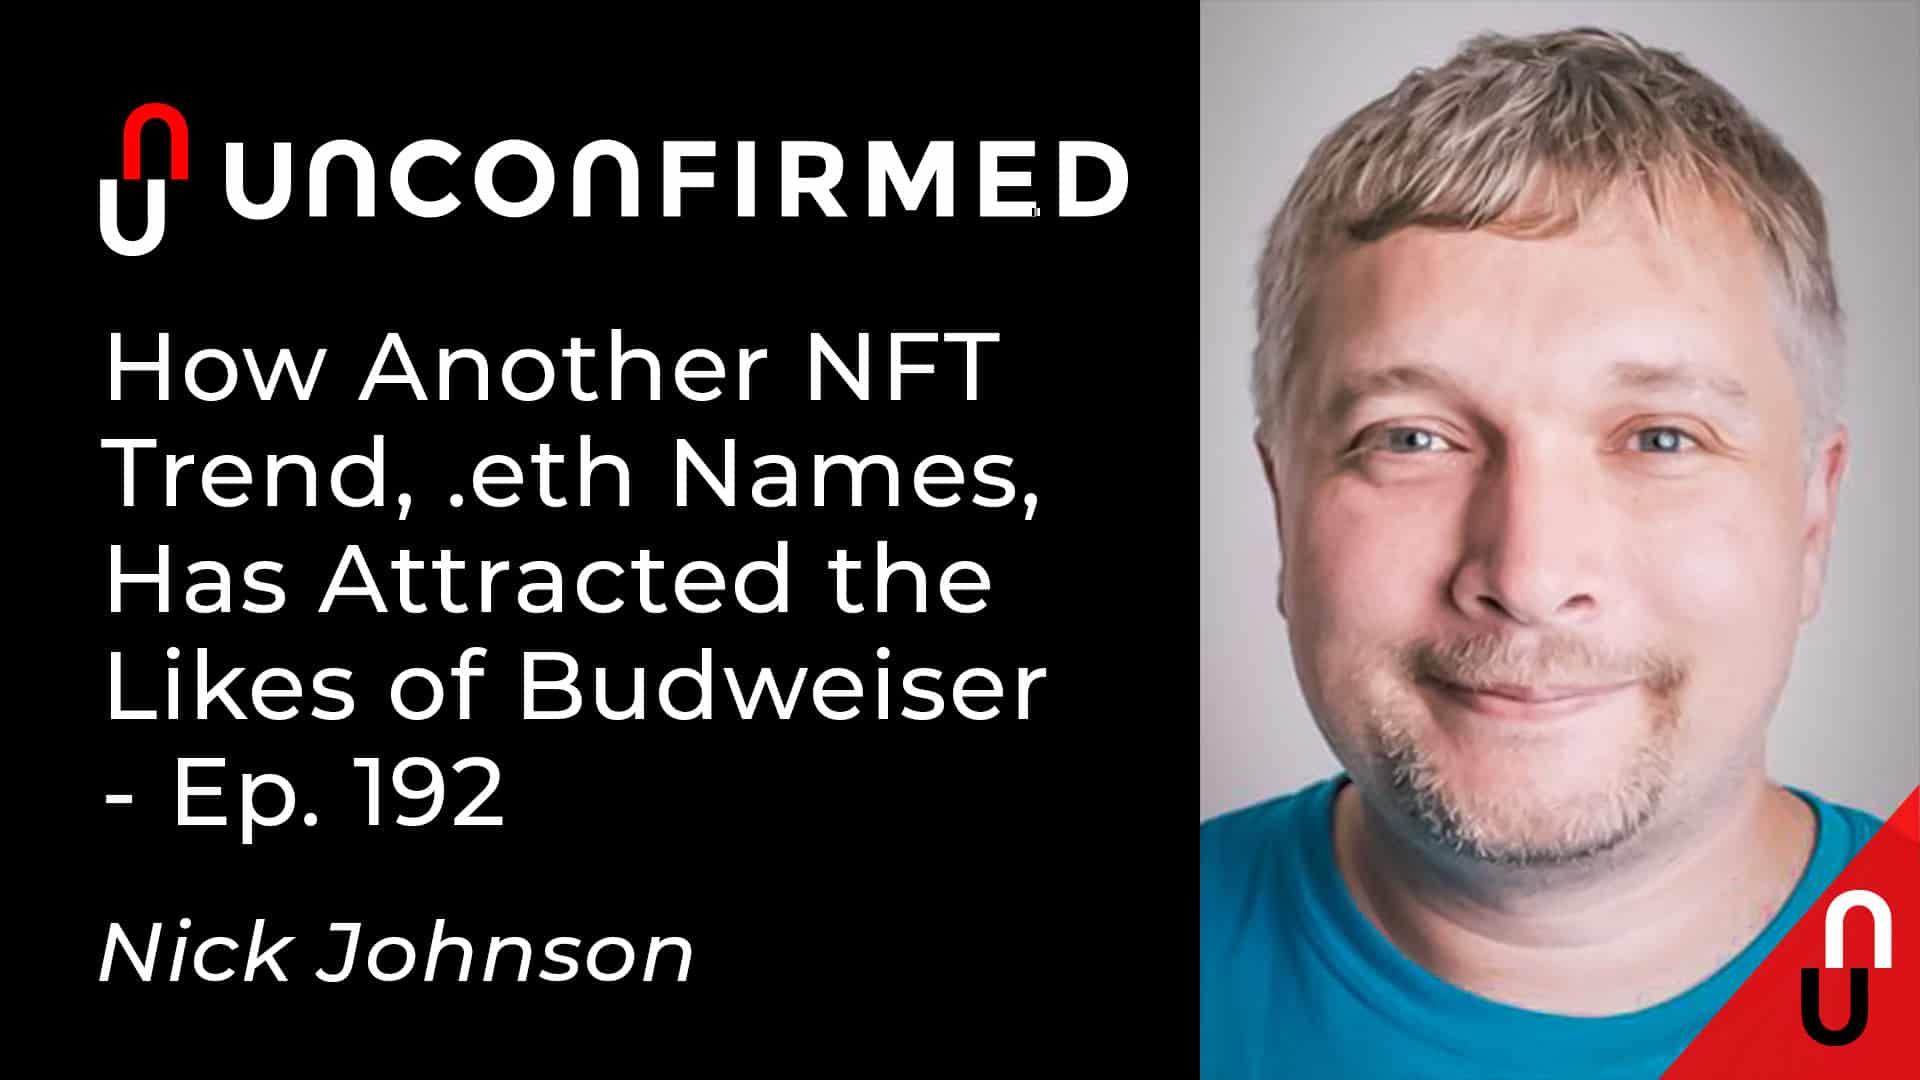 Unconfirmed - Ep.192 - How Another NFT Trend, .eth Names, Has Attracted the Likes of Budweiser